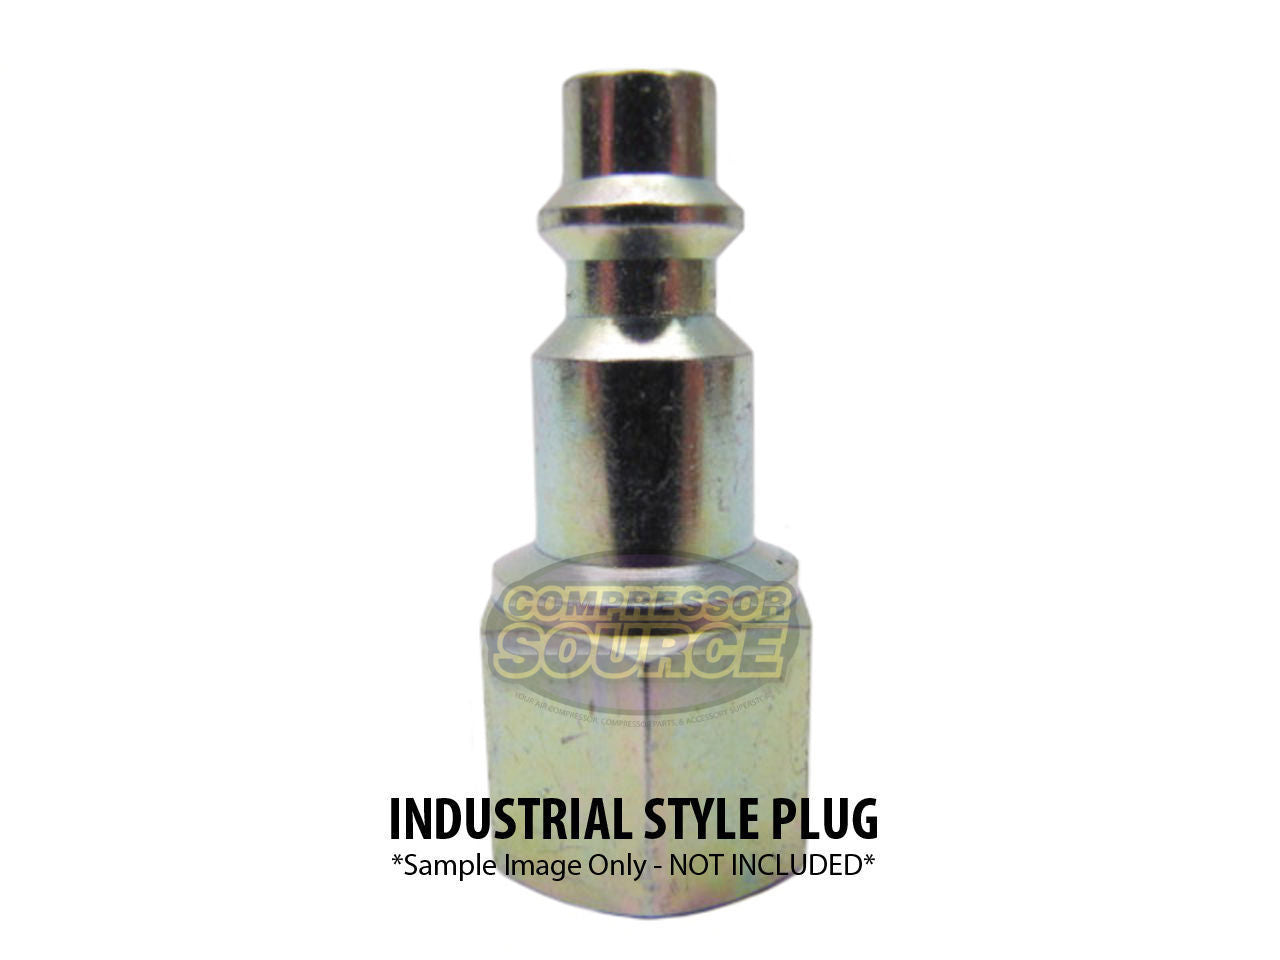 Prevost ISI061251 Safety Air Plug Coupler 1/4" MNPT Prevo S1 Industrial Style